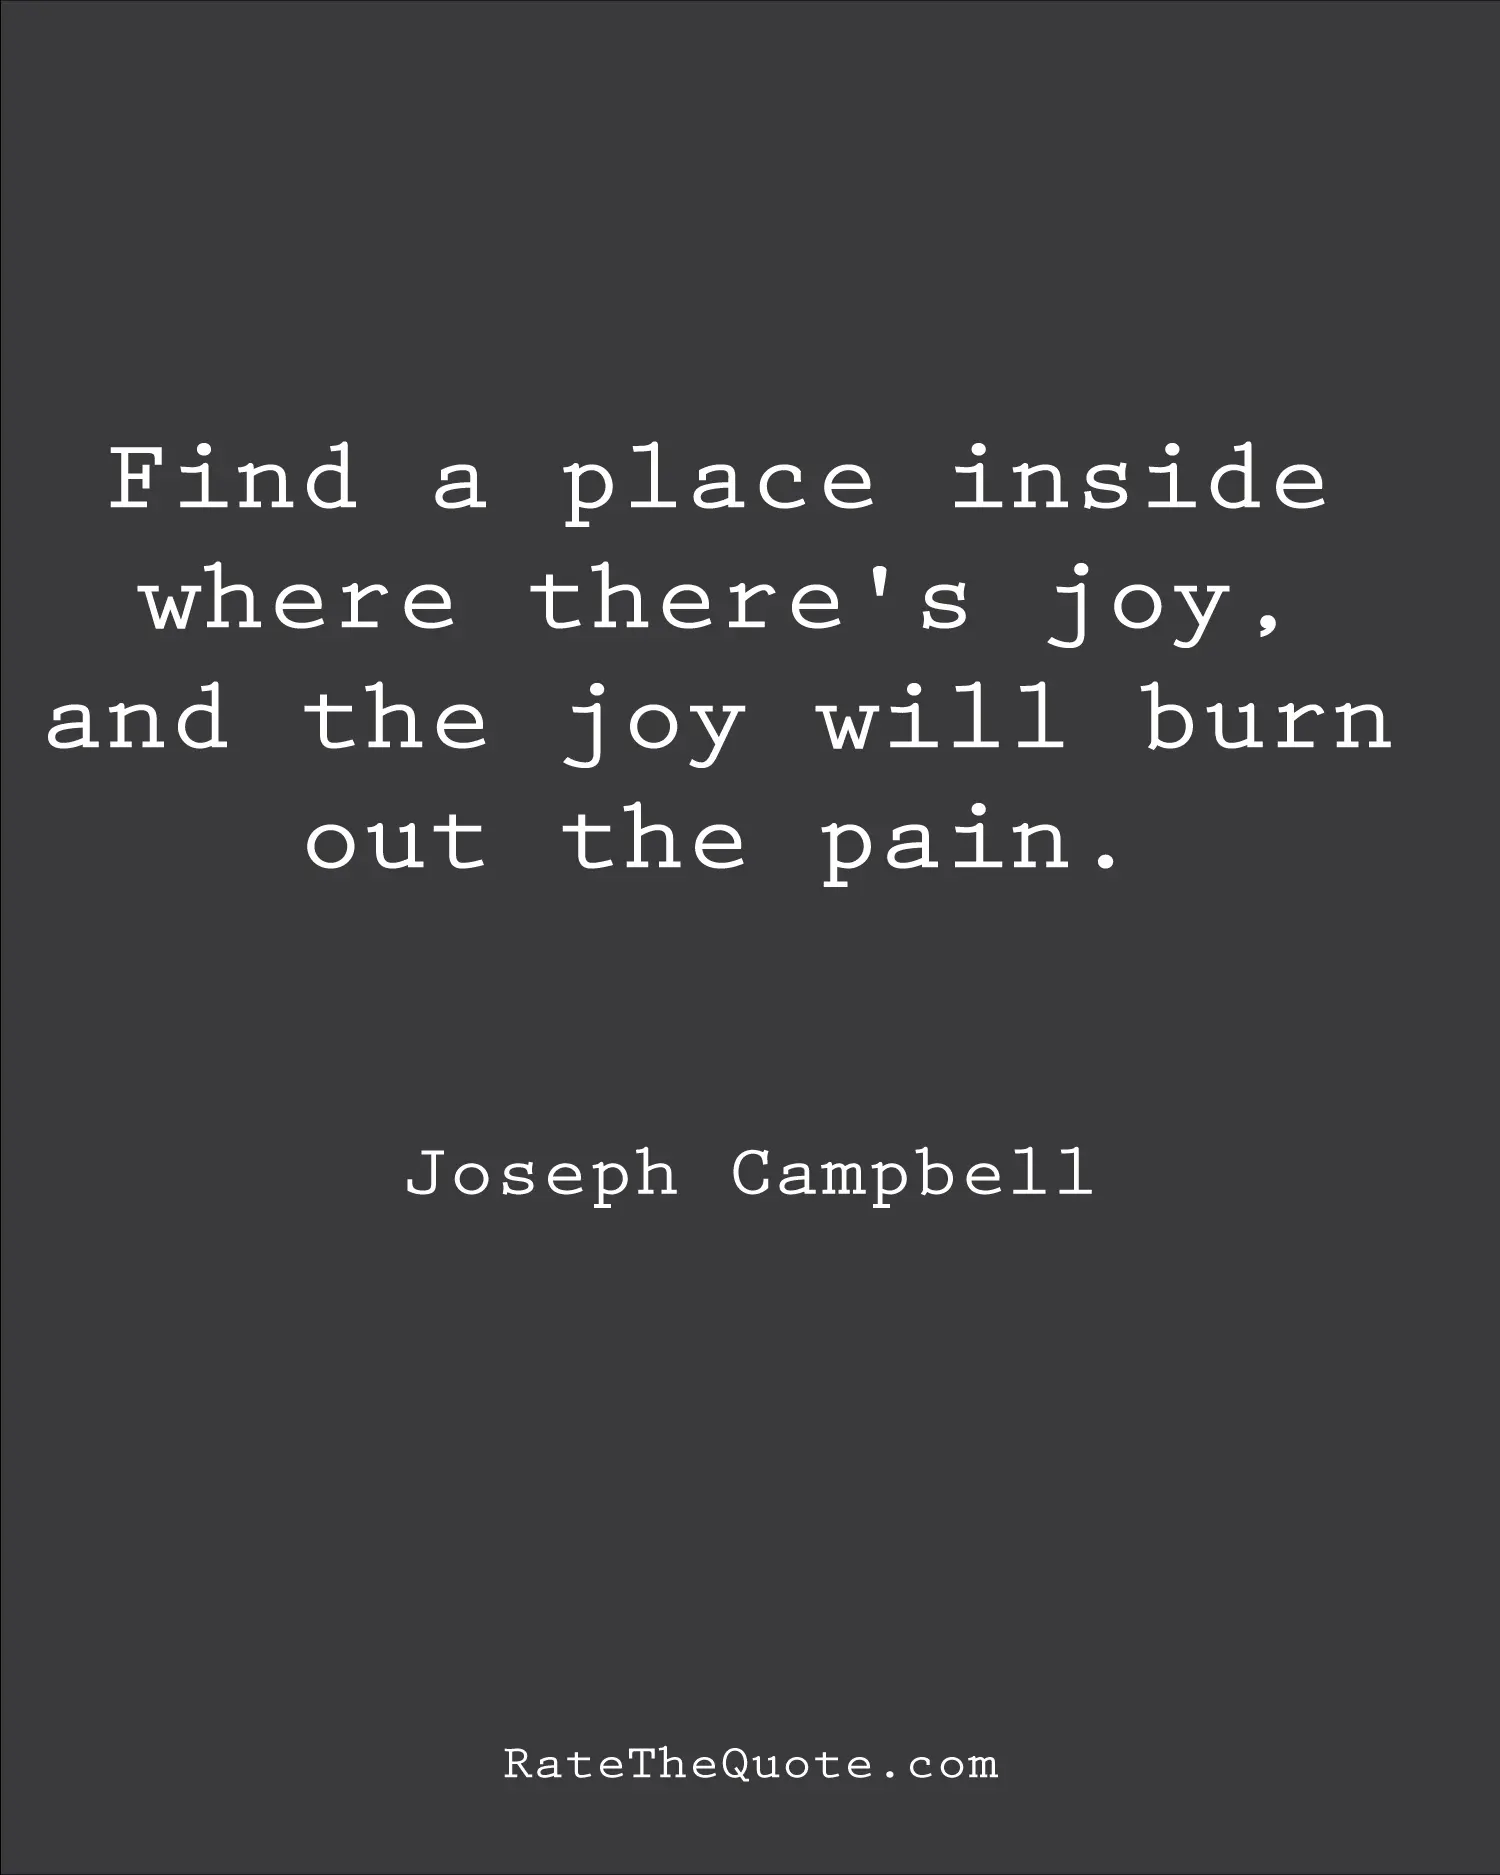 Find a place inside where there's joy, and the joy will burn out the pain. Joseph Campbell